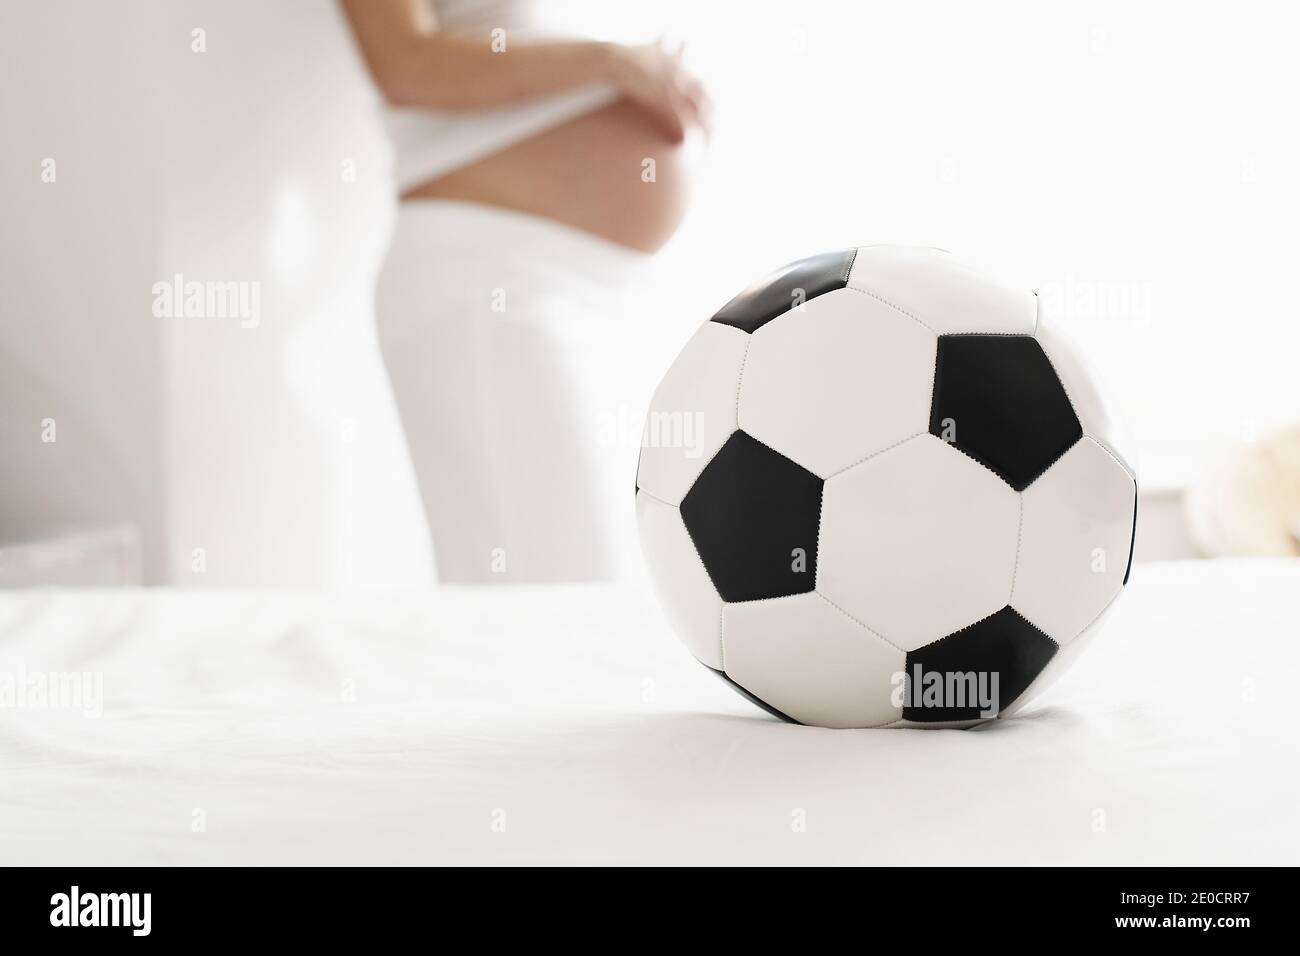 https://c8.alamy.com/comp/2E0CRR7/great-britain-england-london-soccerball-with-pregnant-woman-profile-defocussed-2E0CRR7.jpg